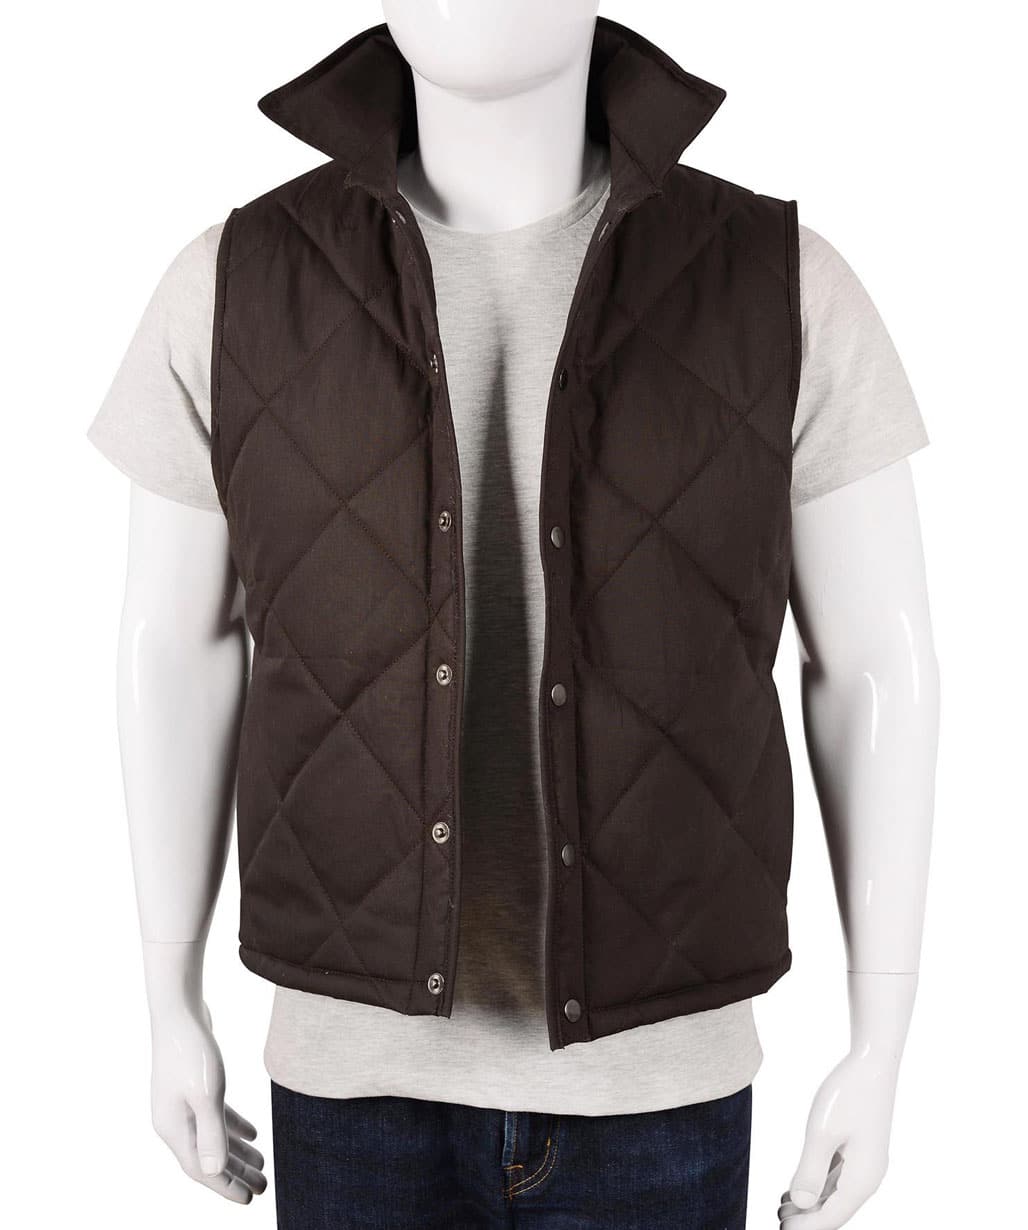 Kevin-Costner-John-Dutton-Yellowstone-Quilted-Brown-Vest-Sale-USA-UK-Canada-Australia